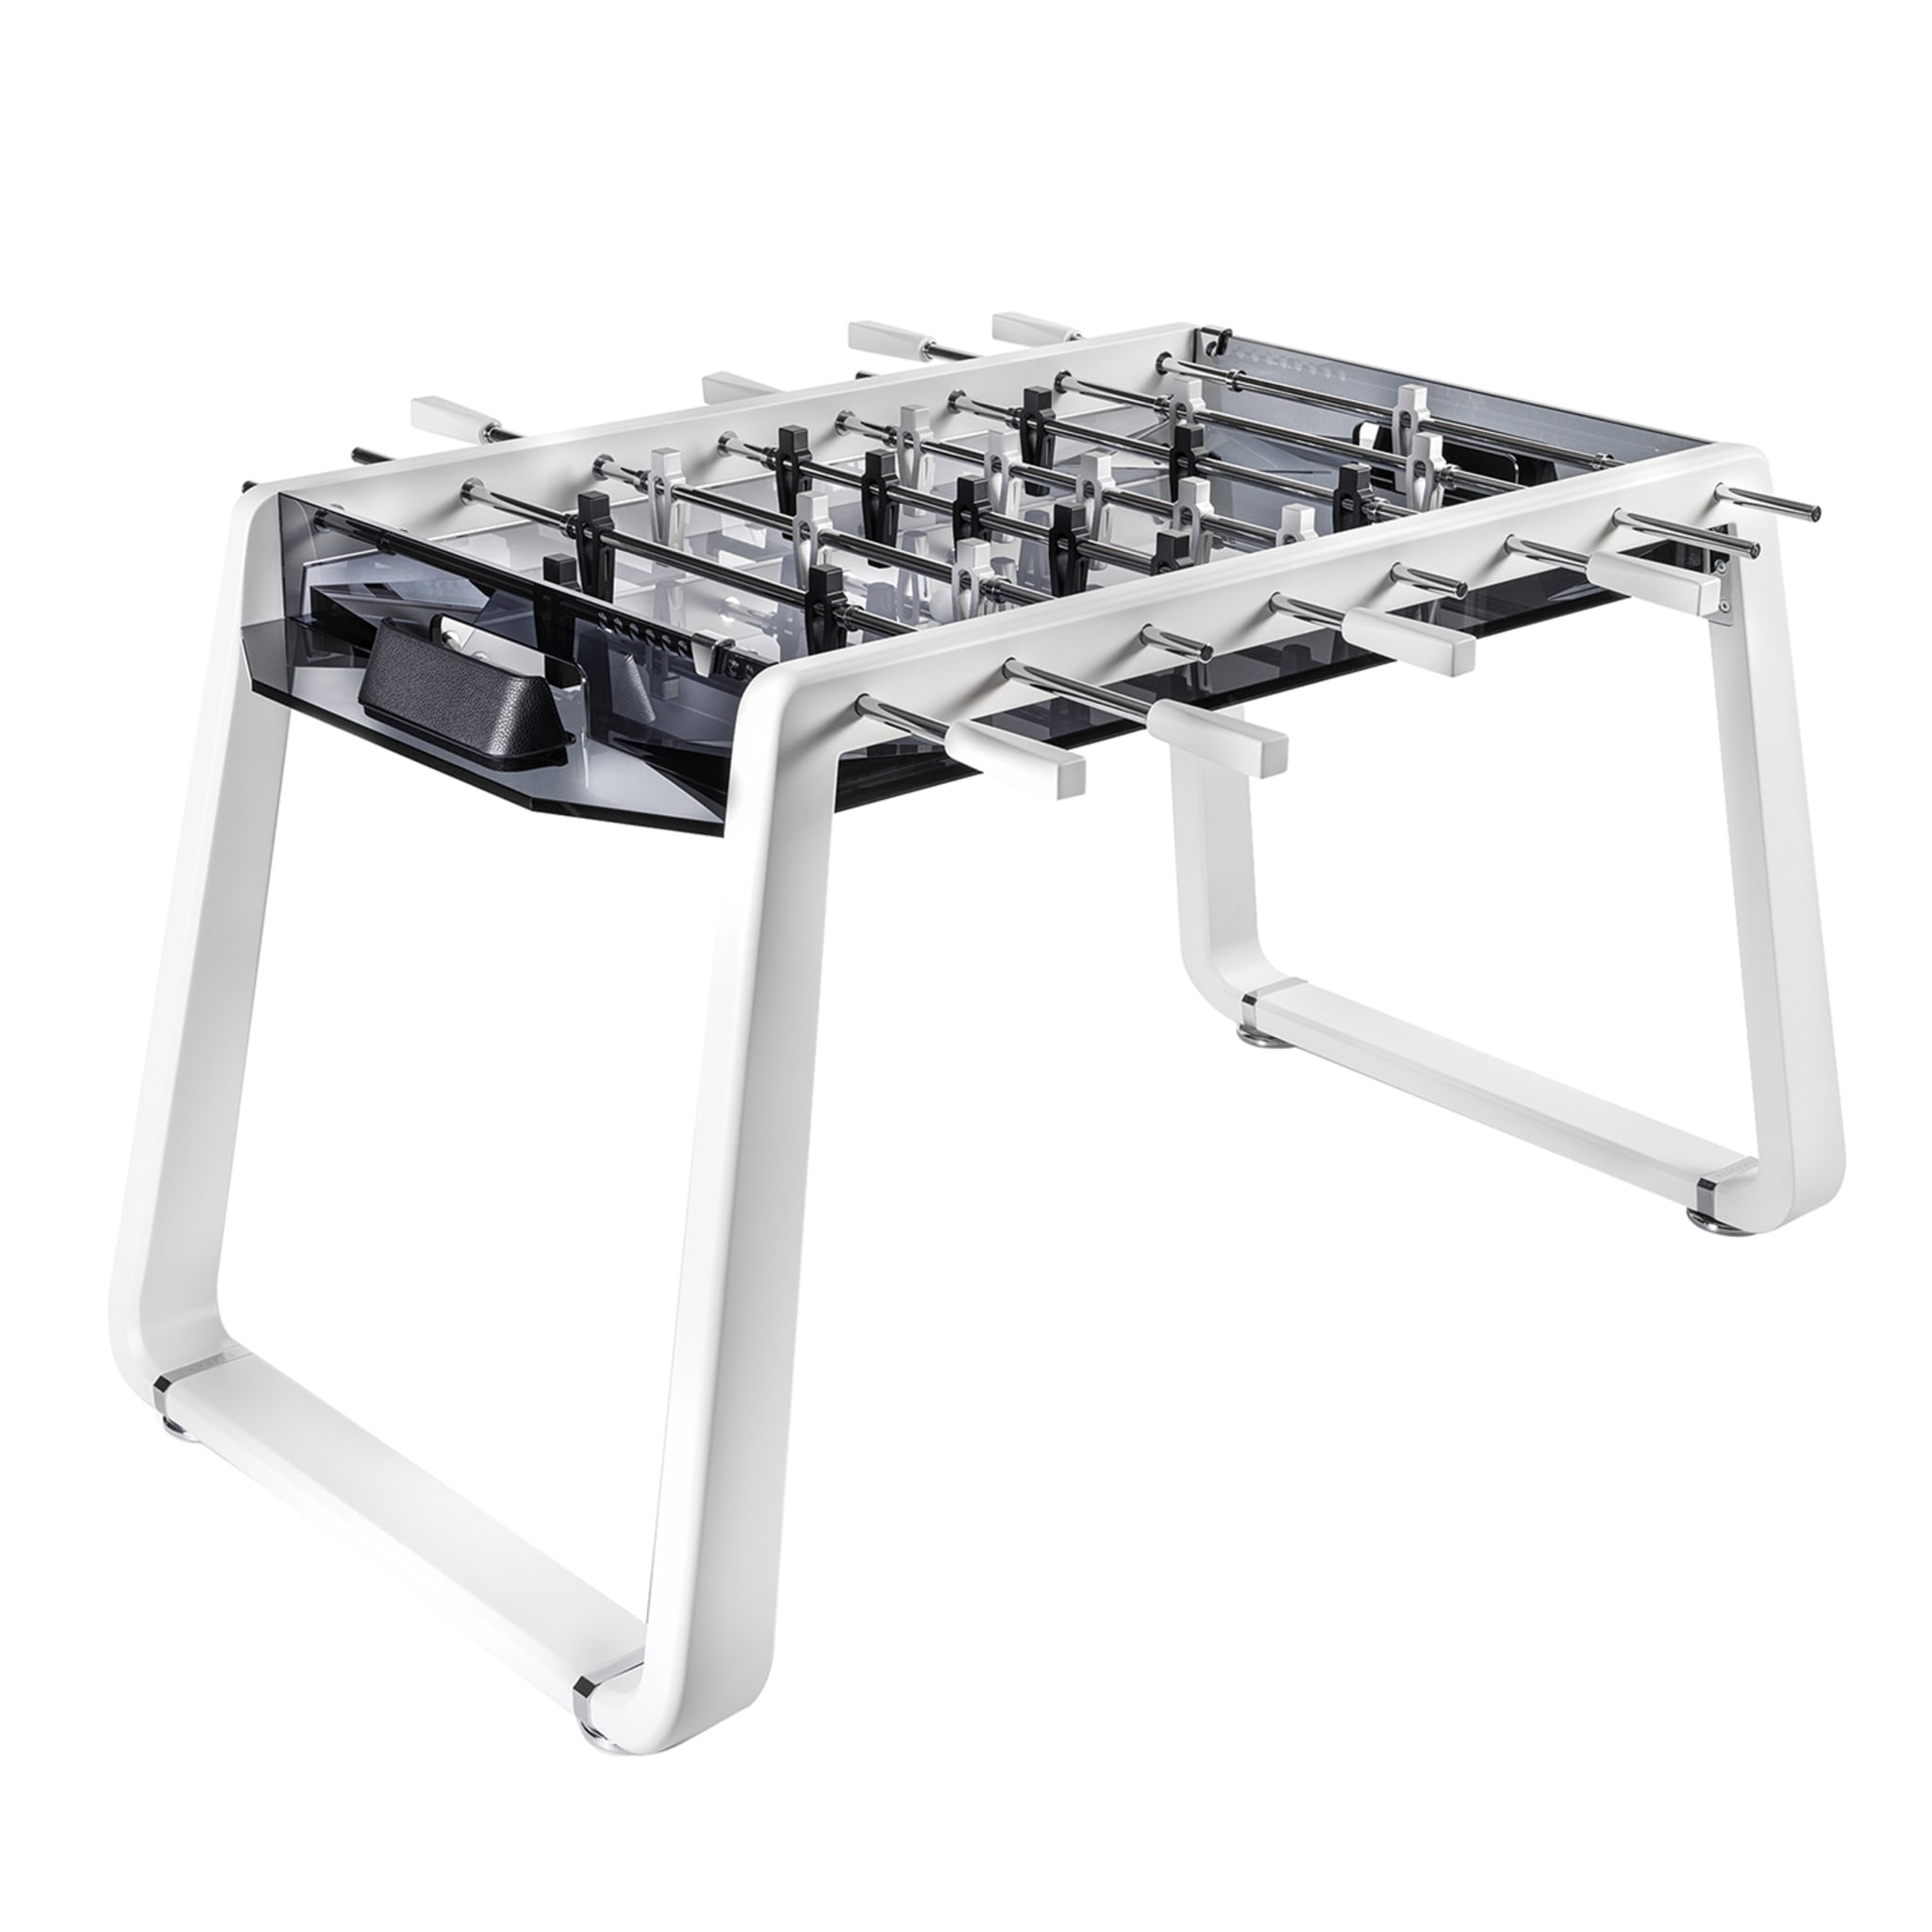 Derby Canvas Smoked Glass Foosball Table - Main view